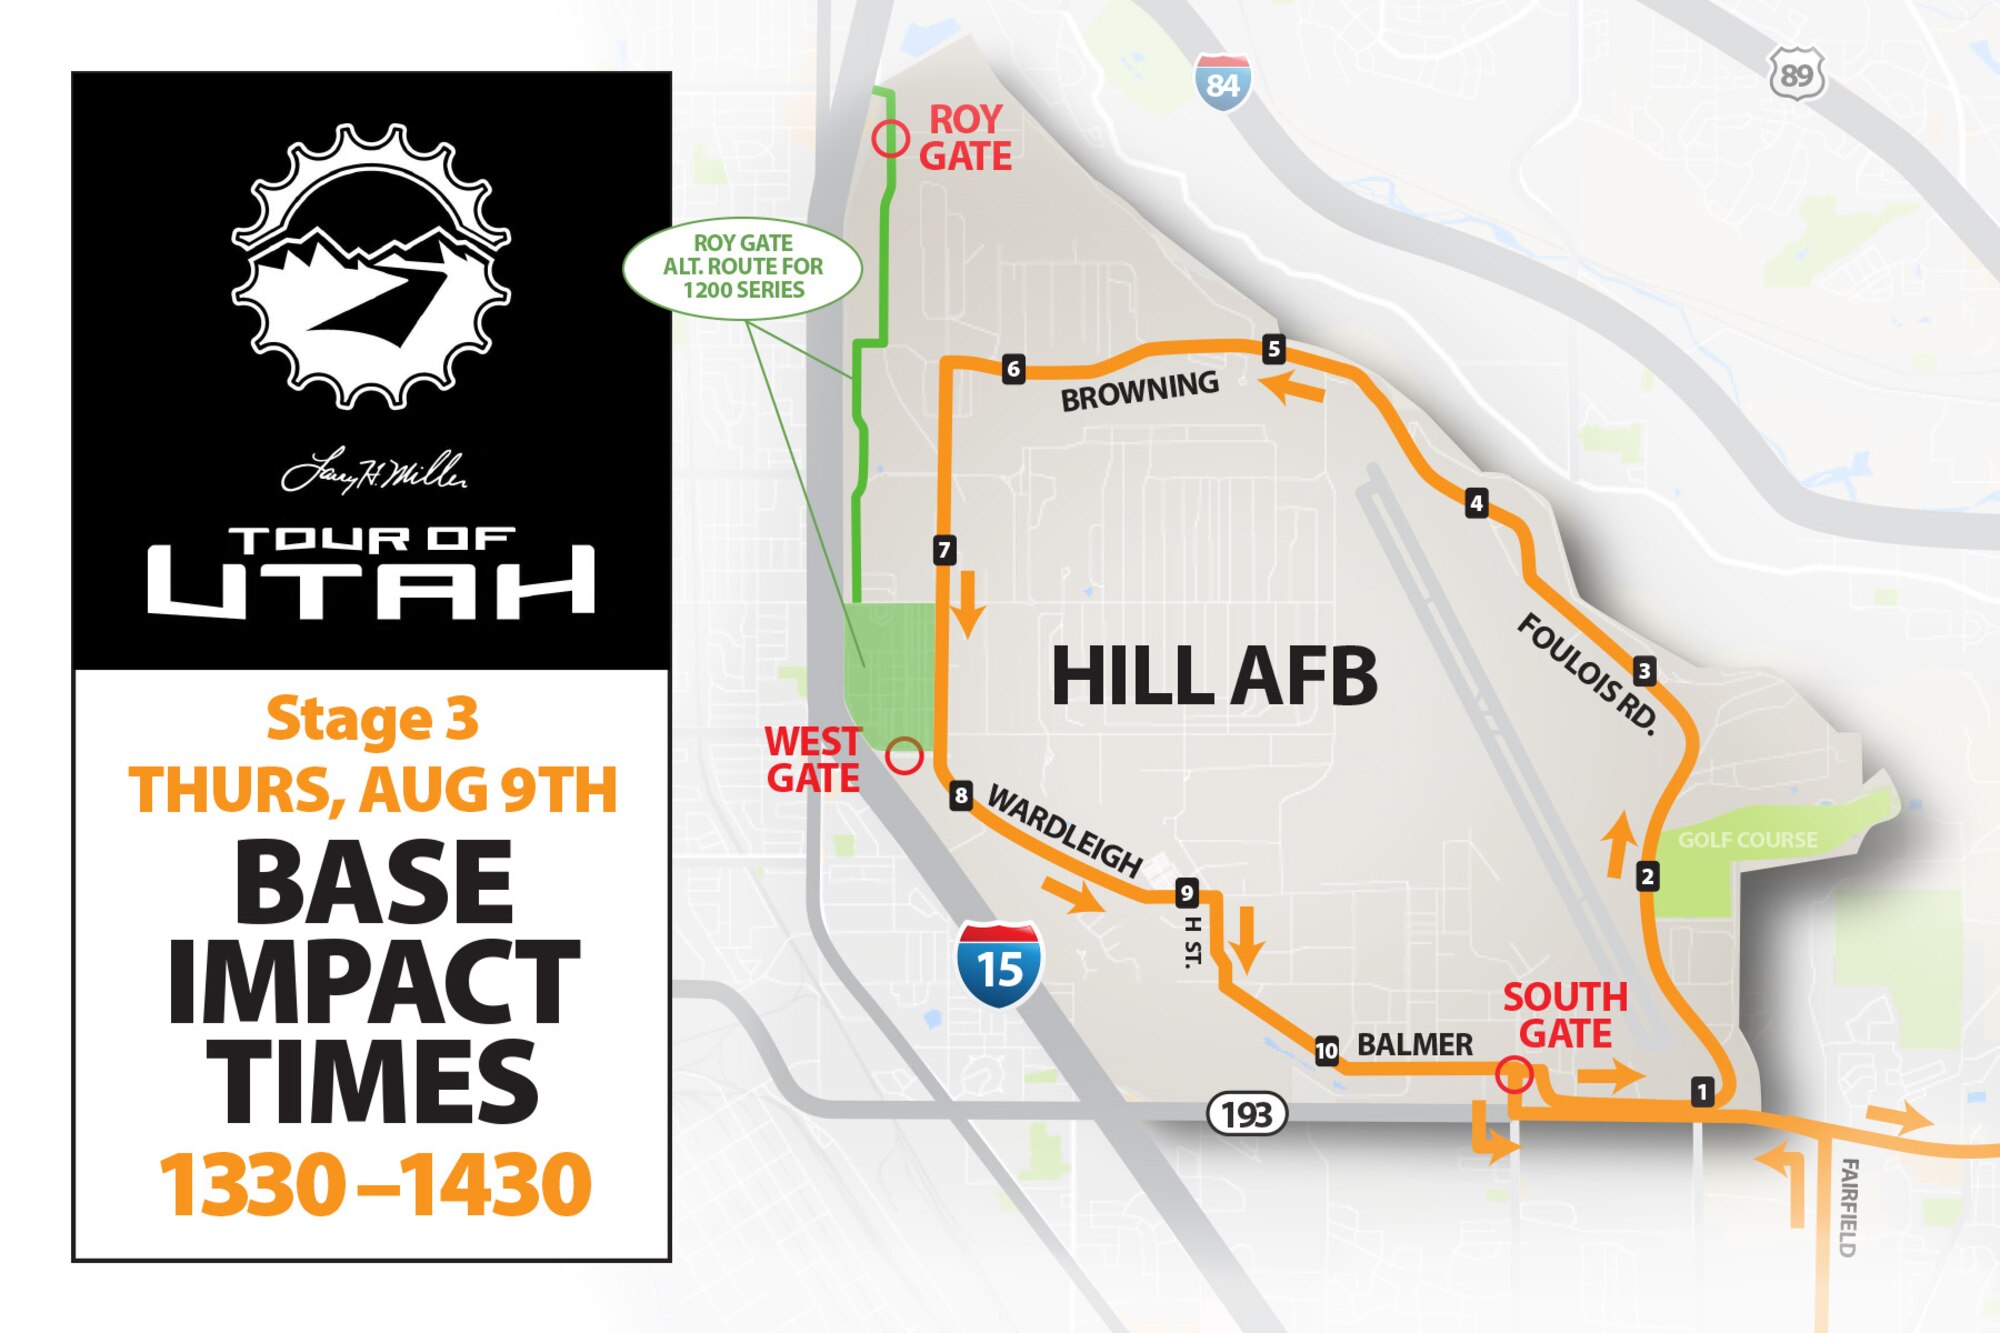 The Tour of Utah professional bicycle race is scheduled to pass through Hill Air Force Base approximately between 1:30-2:30 p.m. Aug. 9. Motorists should expect some impact to gates and traffic on- and off-base during this time period. (U.S. Air Force graphic by David Perry)